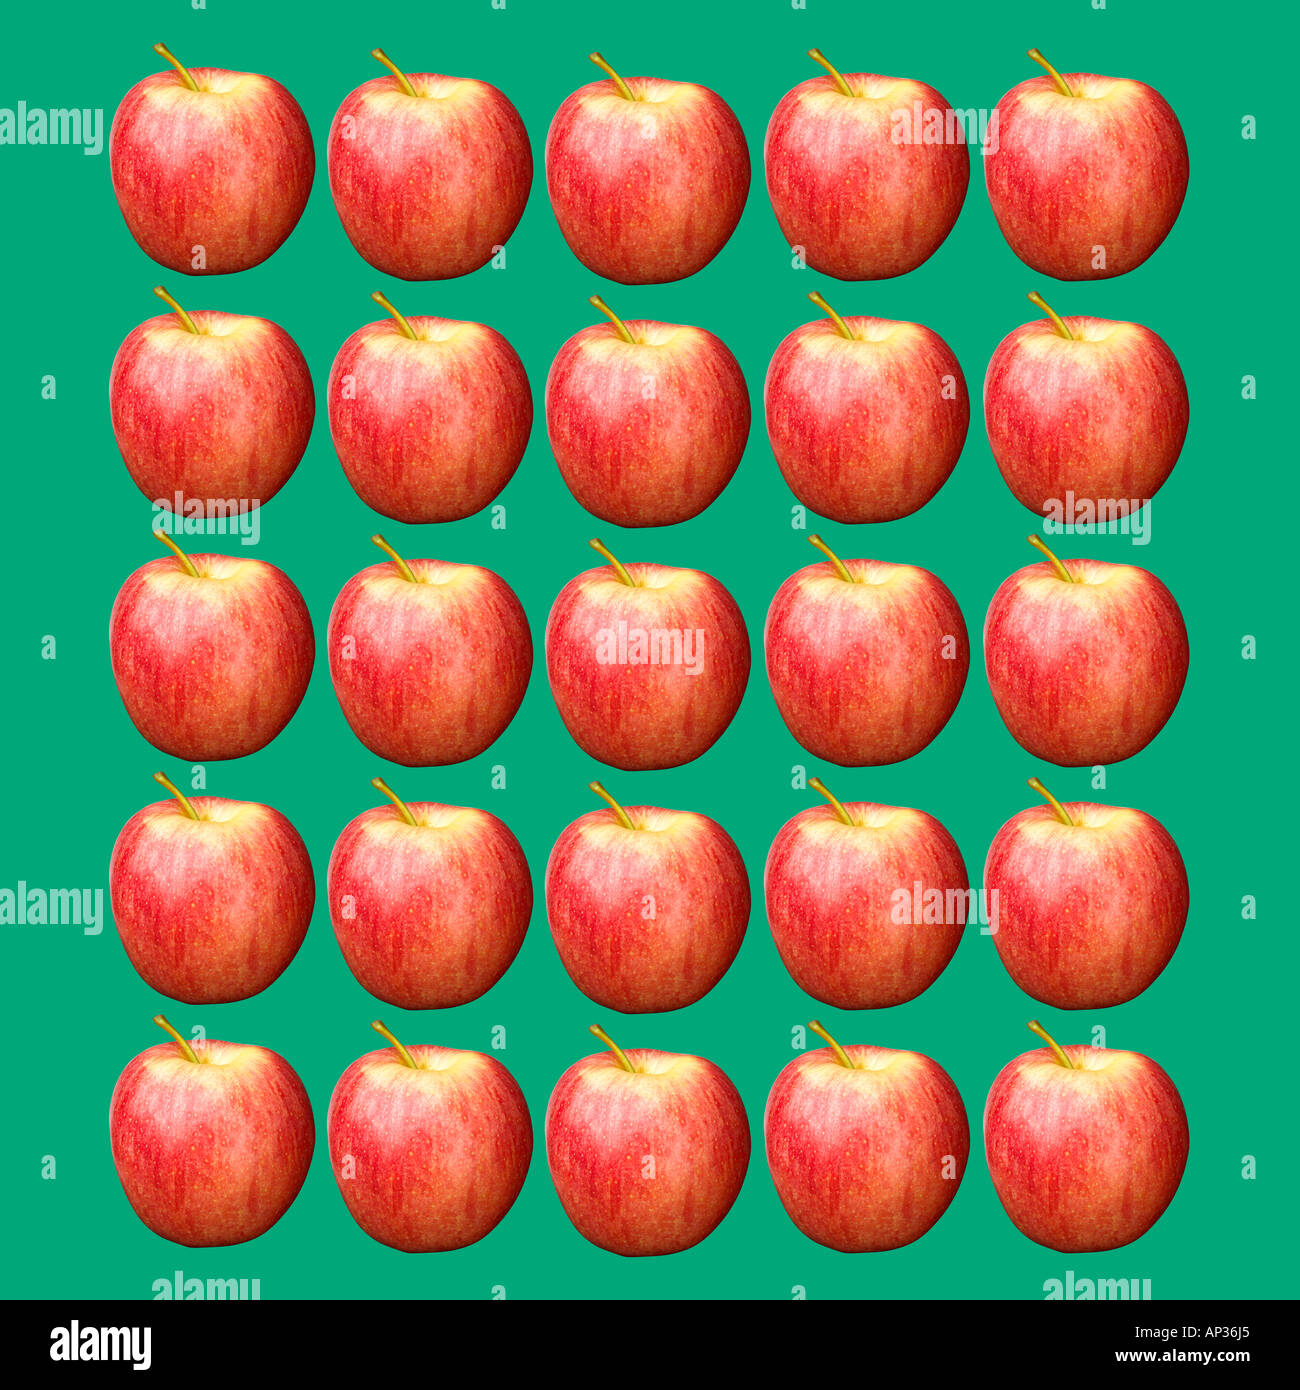 Abstract rows of red apples arranged in a square format Stock Photo